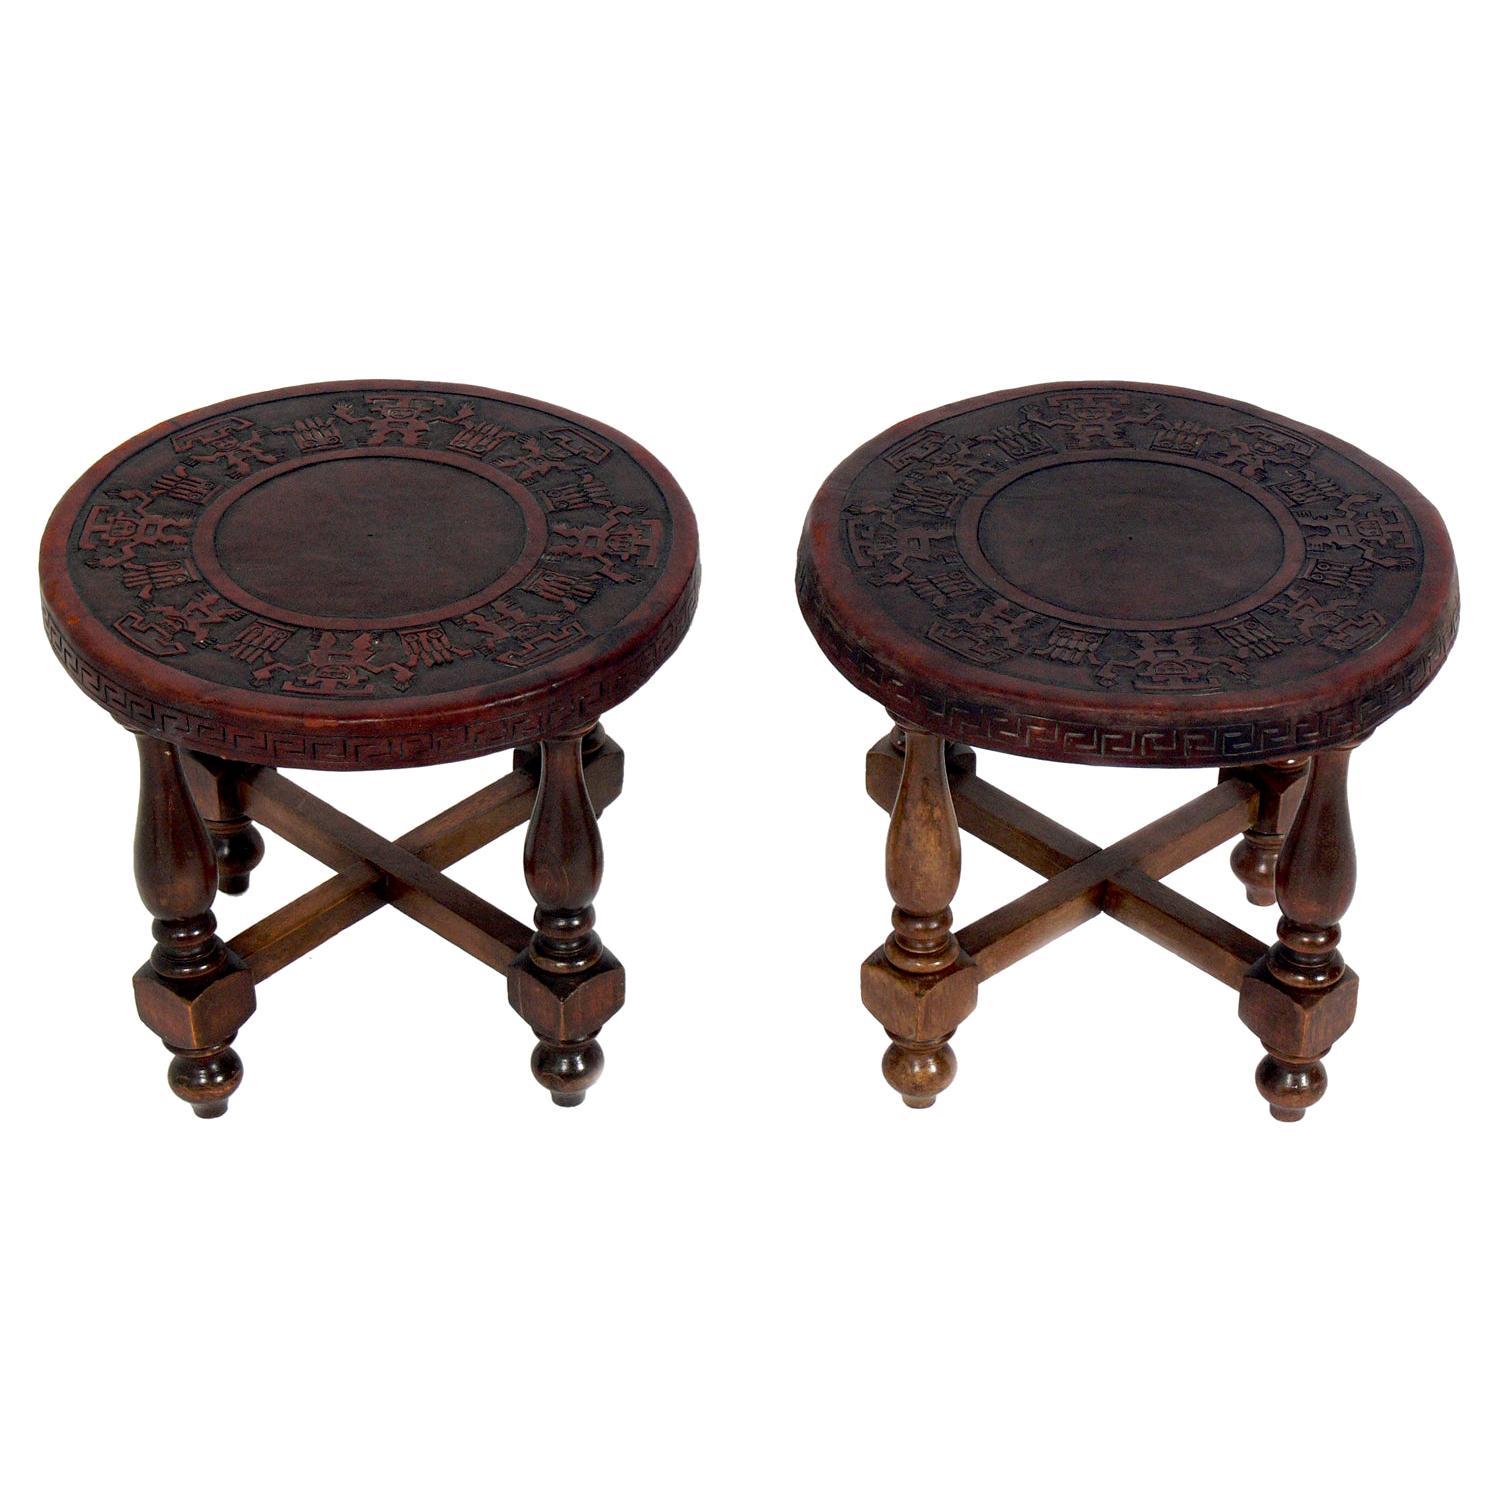 Pair of Mexican Embossed Leather End Tables or Stools